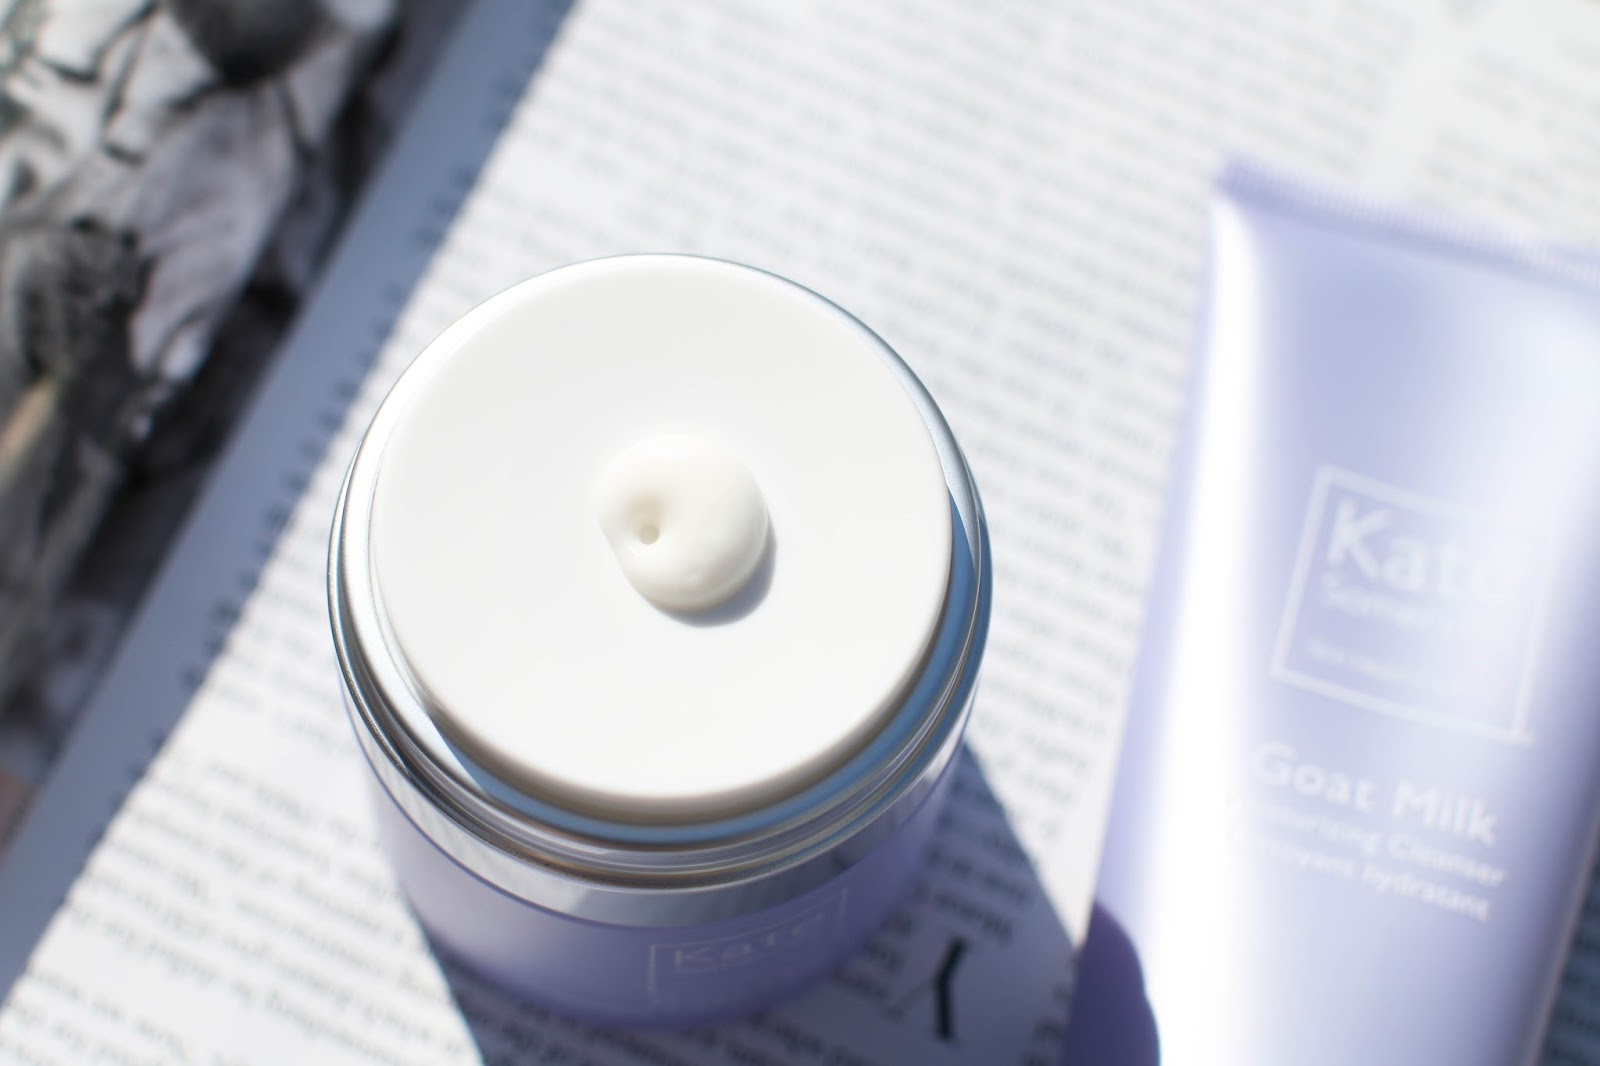 Review of the new Kate Somerville Goat Milk Collection.